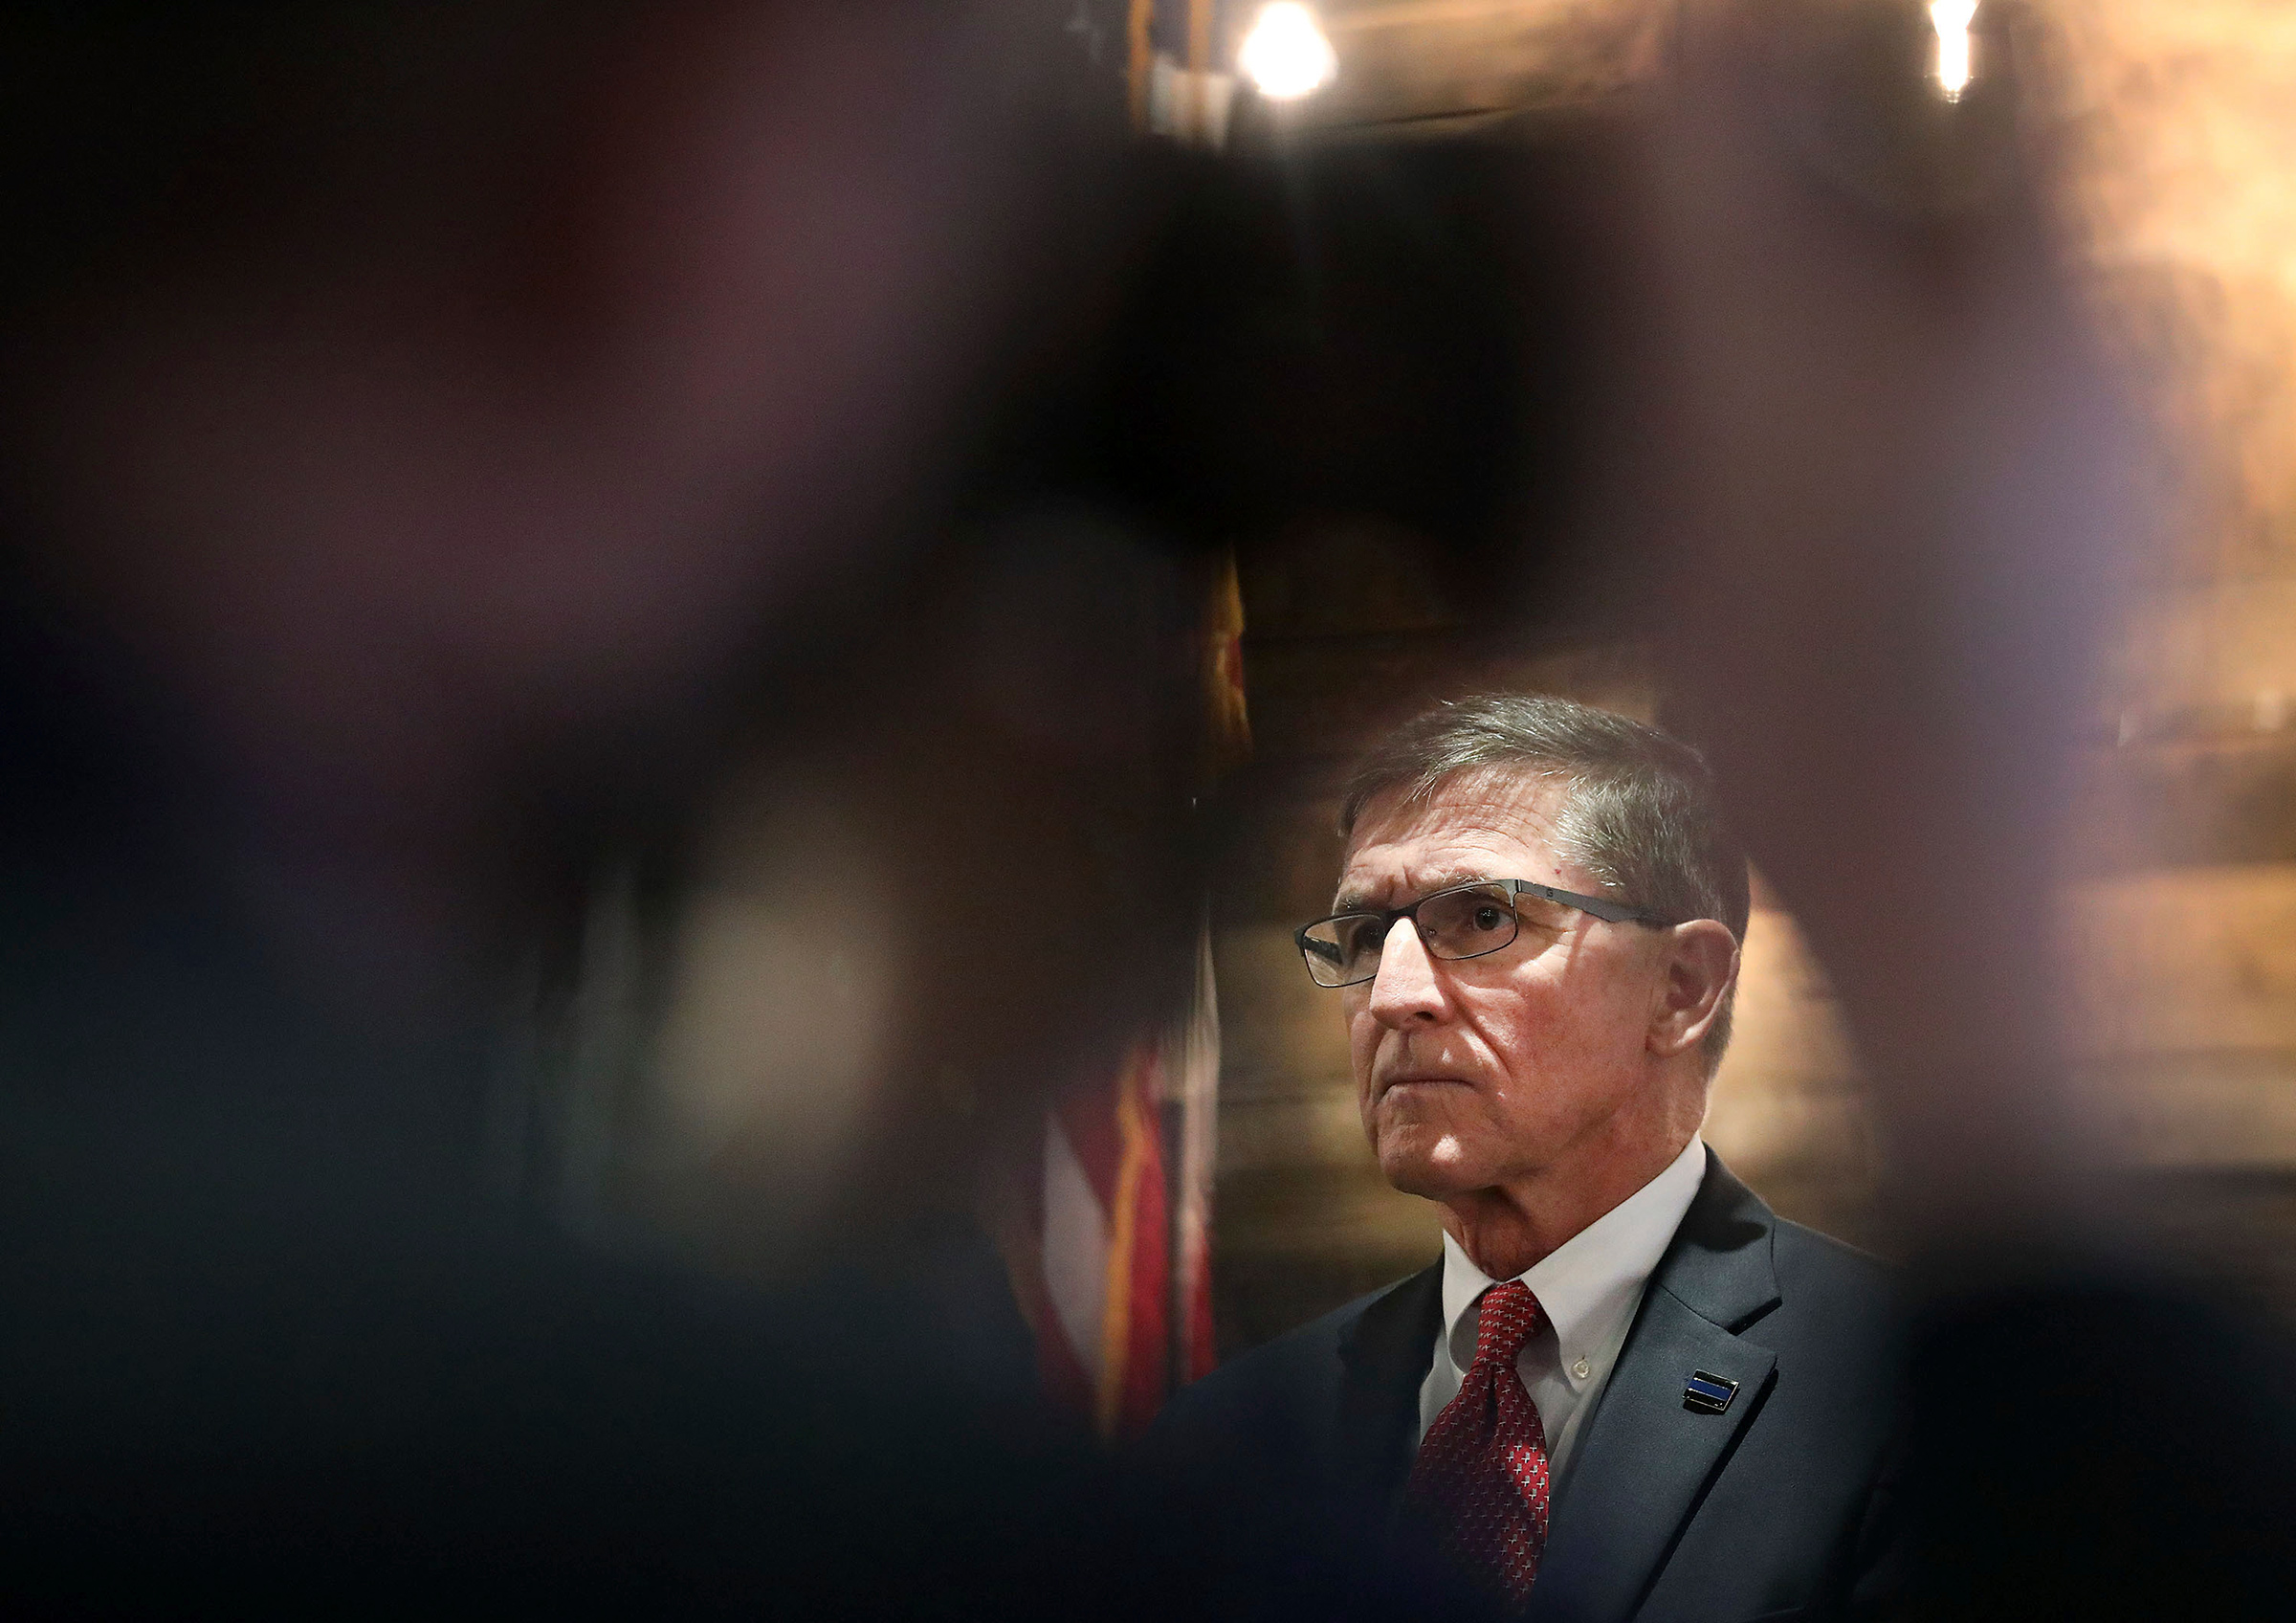 A journalist takes a photo of Retired Gen. Michael Flynn, former National Security Advisor under President Donald Trump, as he takes part in the announcement for Pastor Jackson Lahmeyer's run for the United States Senate, Tuesday, March 16, 2021 in Jenks, Okla. (Mike Simons—Tulsa World/AP)